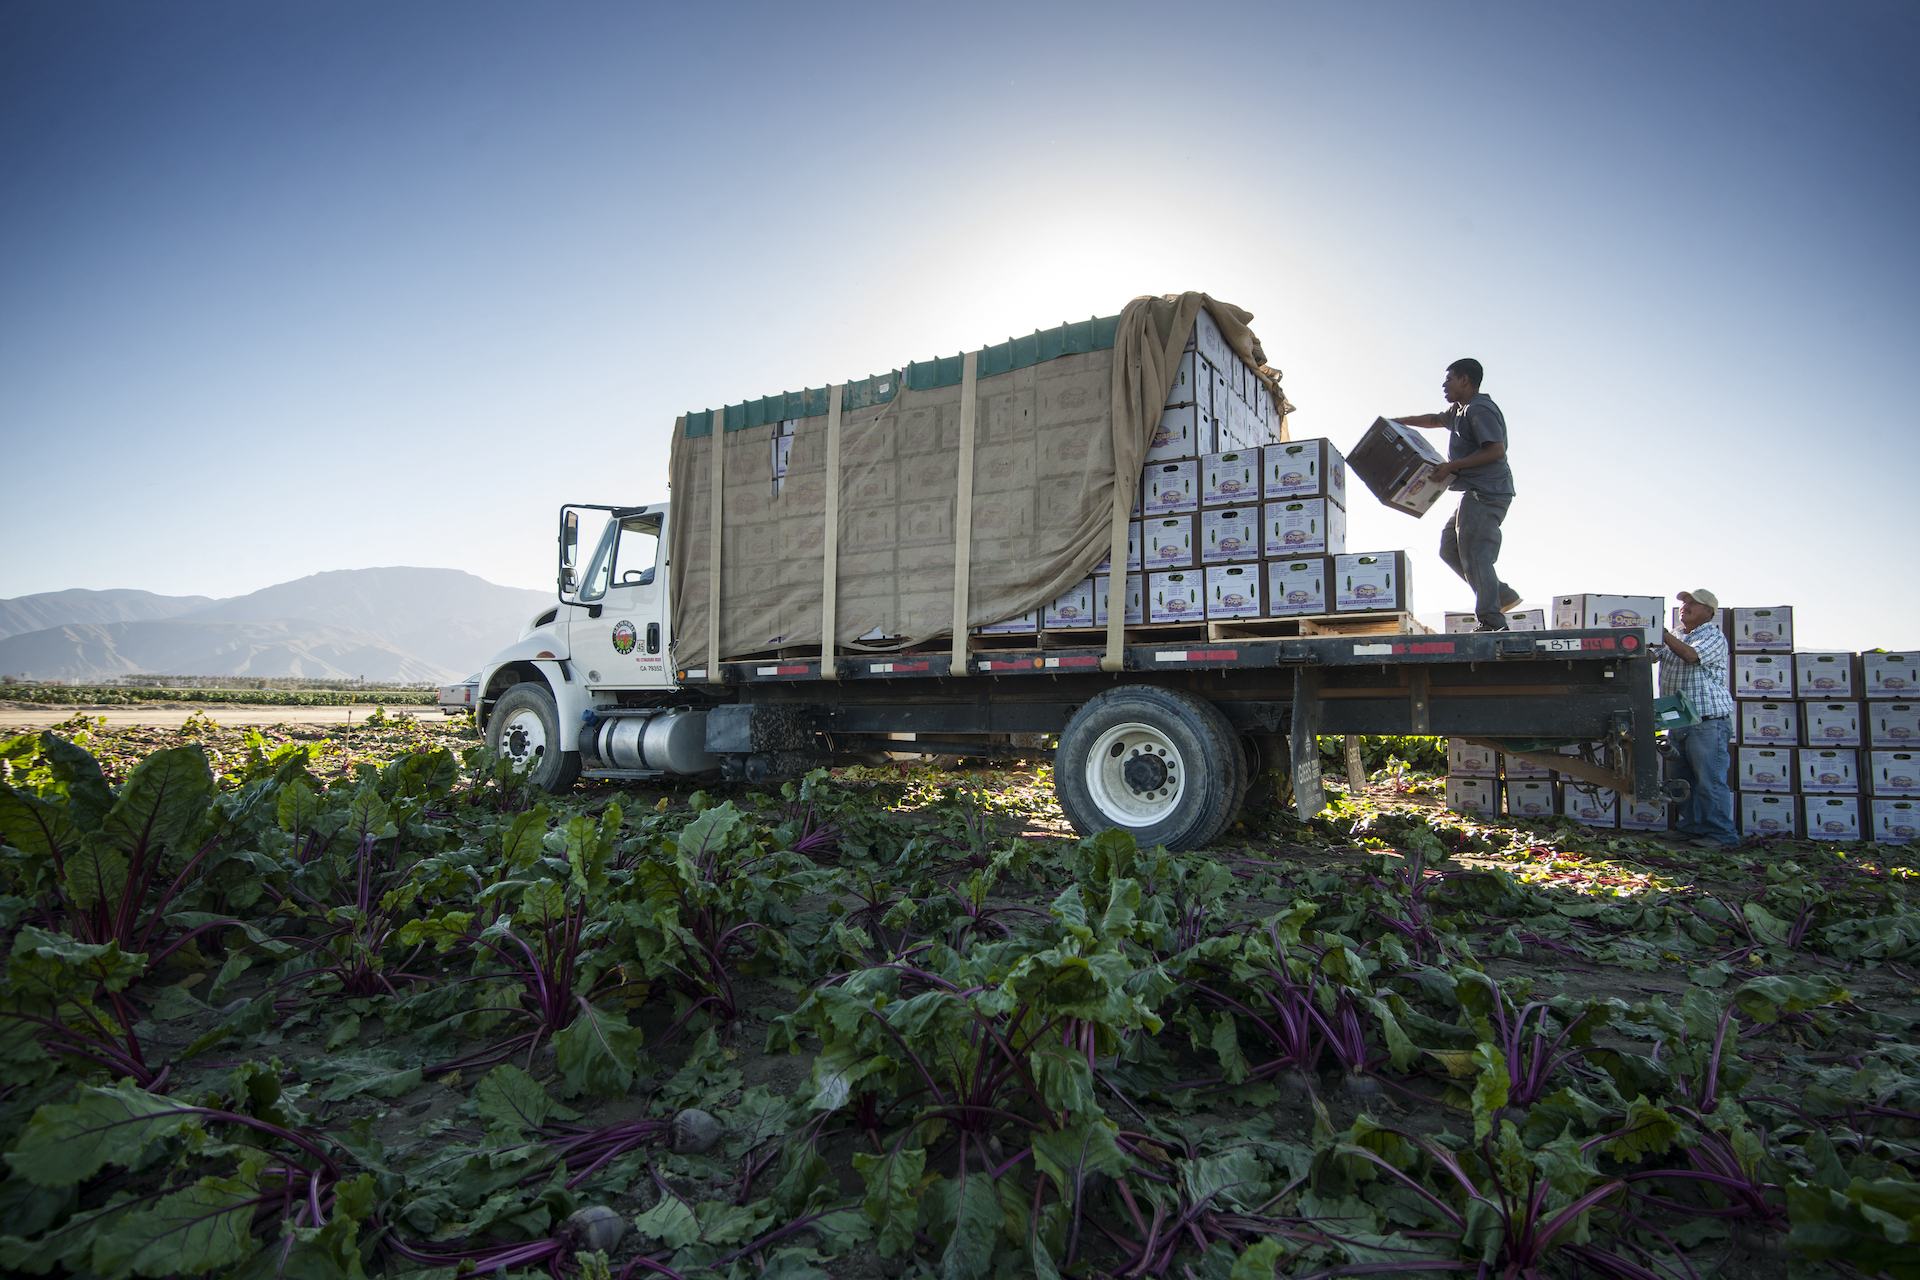 A farmworker loads boxes on a large truck in a field.